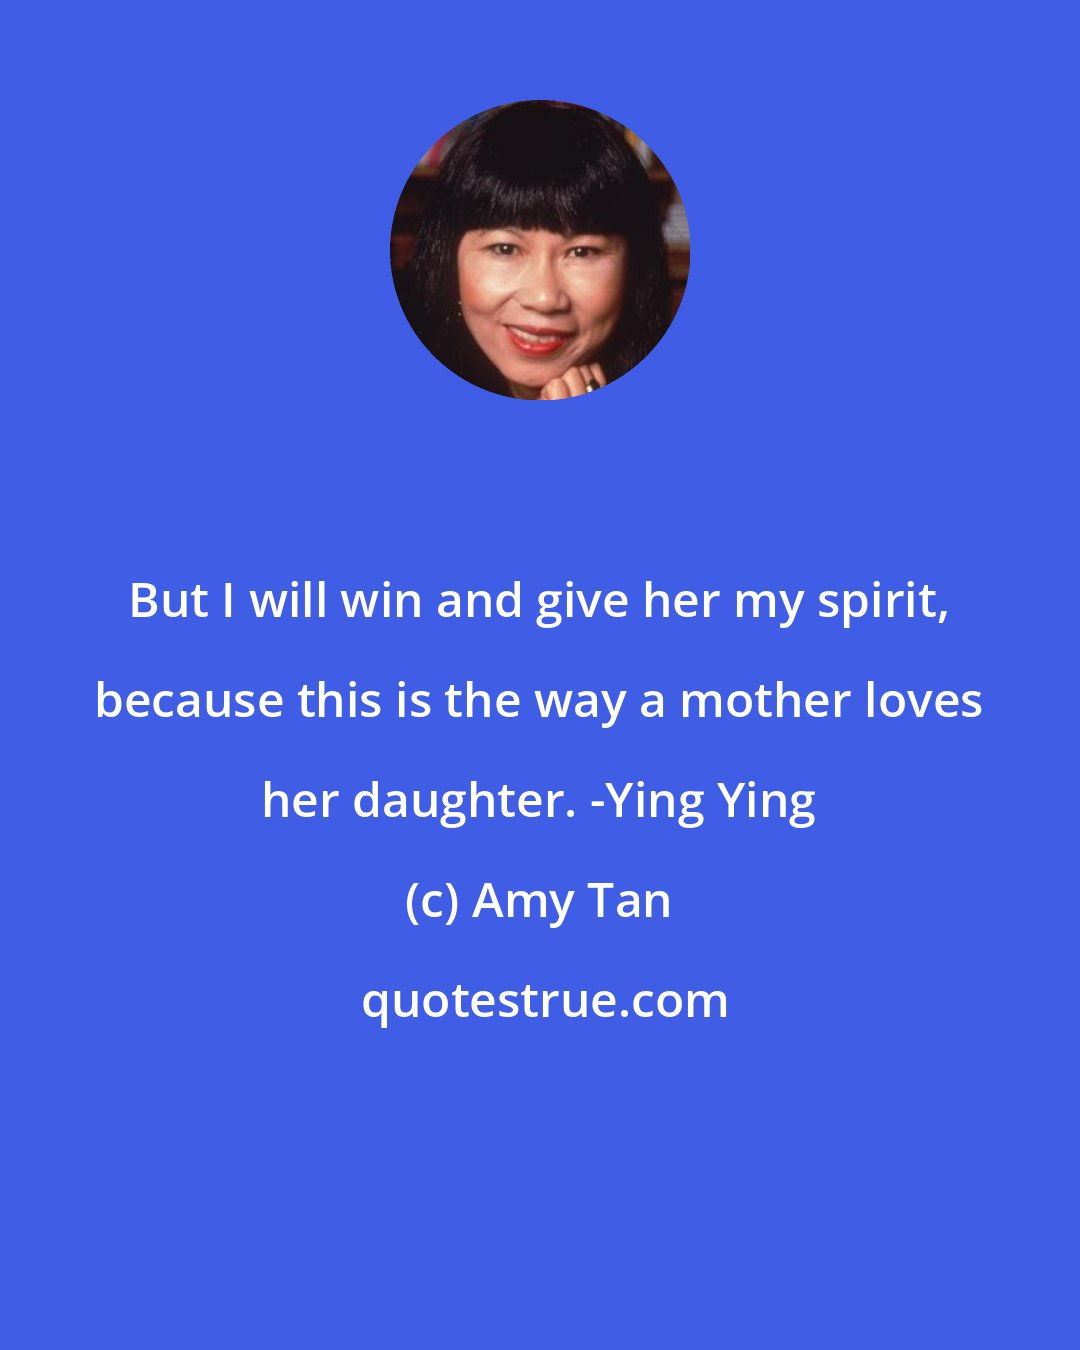 Amy Tan: But I will win and give her my spirit, because this is the way a mother loves her daughter. -Ying Ying